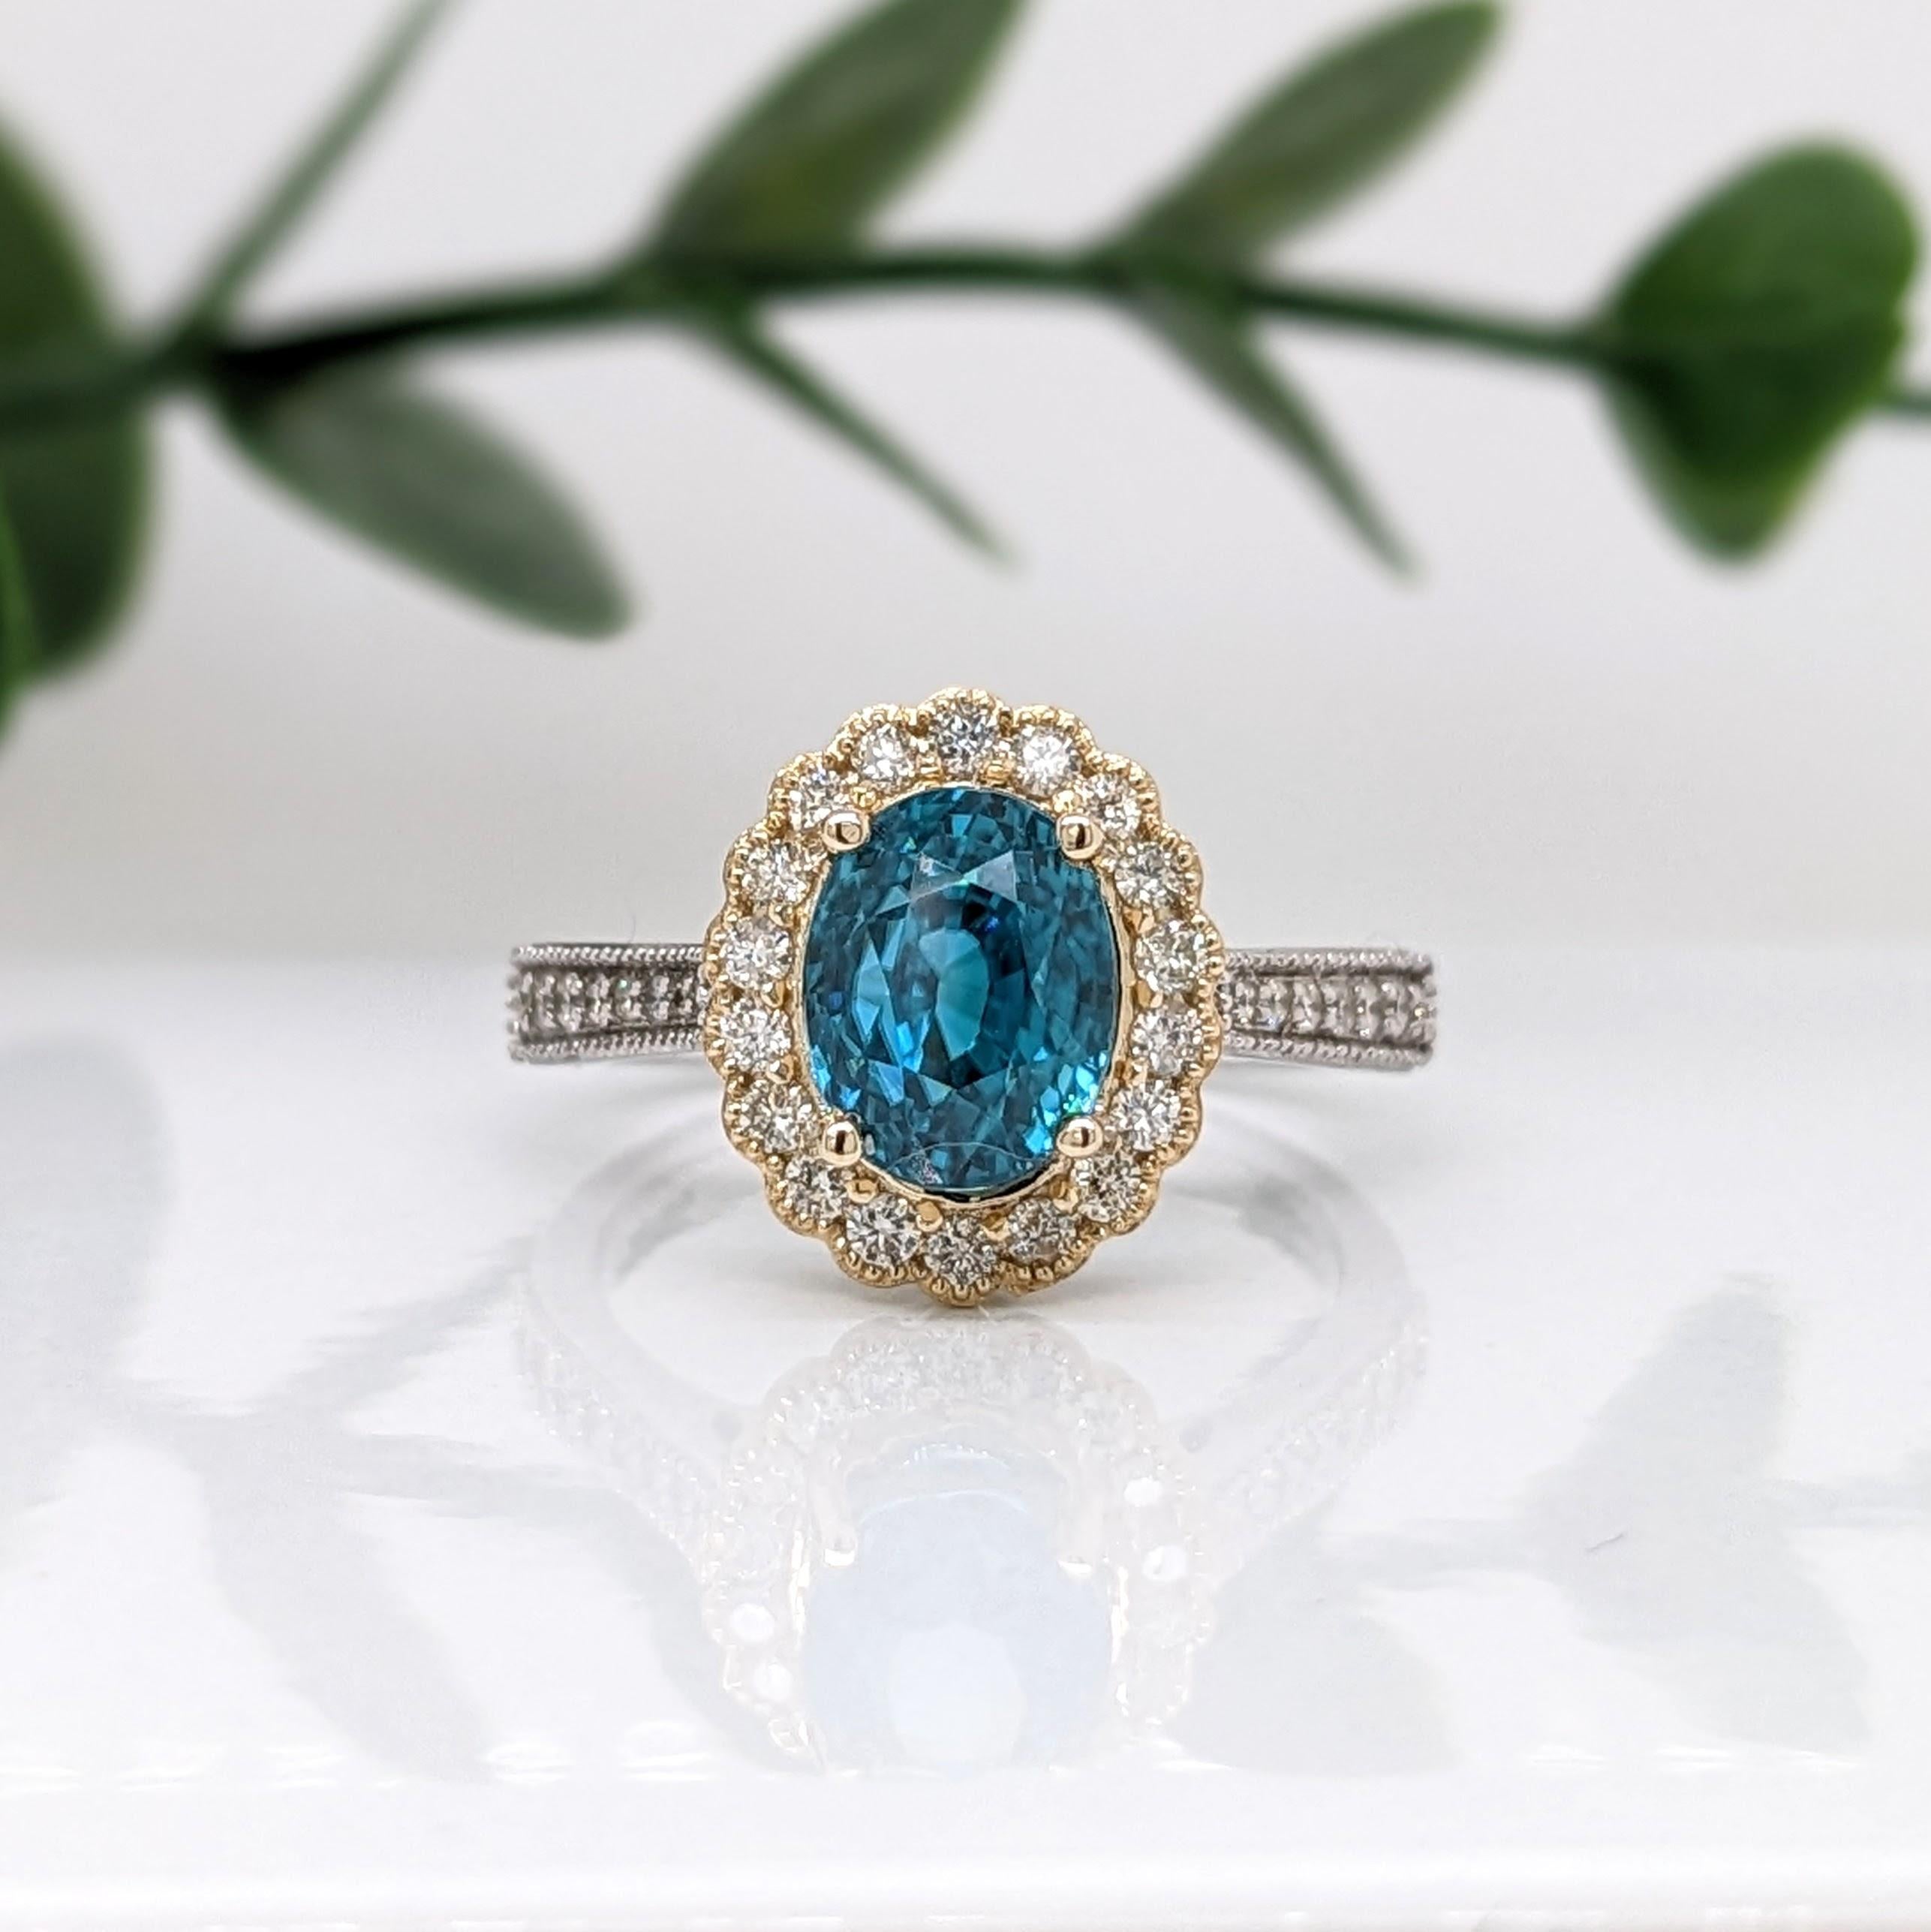 This statement ring features a gorgeous sparkling blue zircon in 14K solid gold with beautiful diamonds. This collection ring makes for a stunning accessory to any look!

A fancy ring design perfect for an eye catching engagement or anniversary.